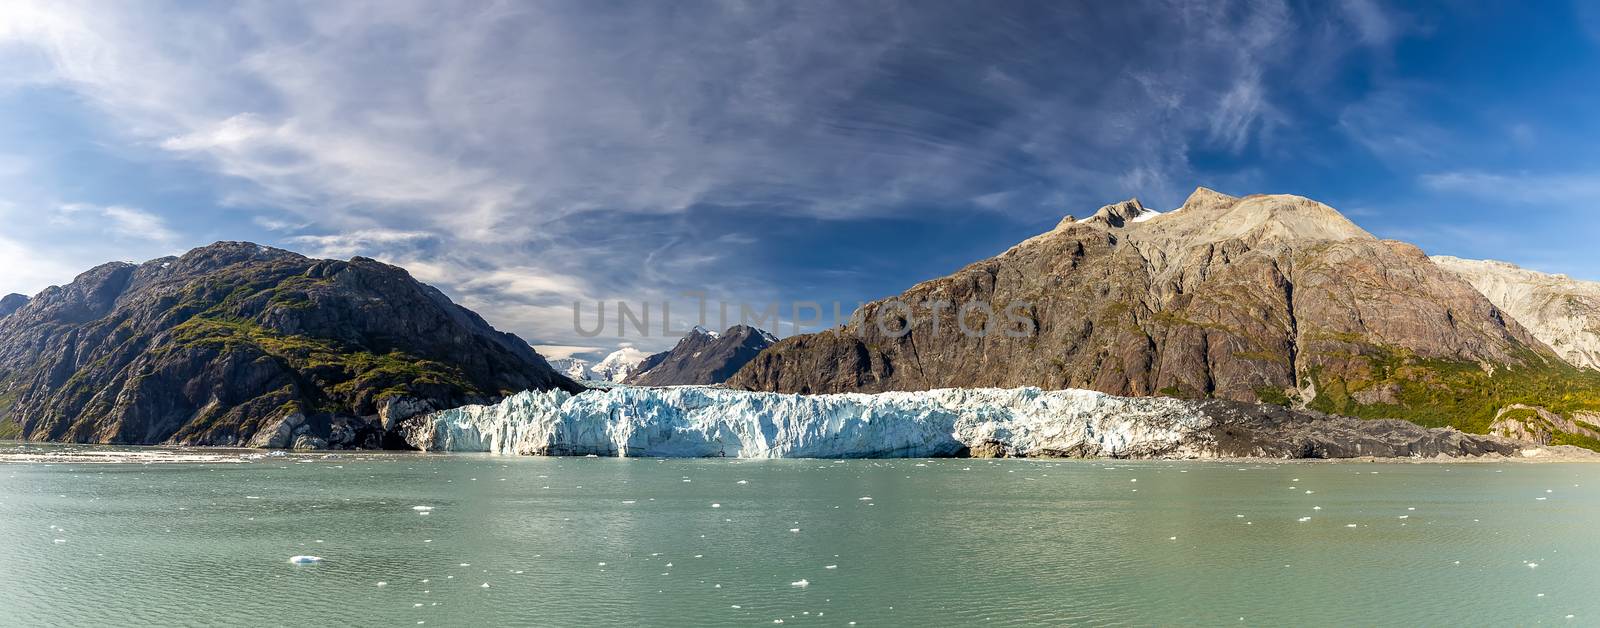 Panoramic view of Margerie glacier surrounded by huge mountains in Glacier Bay National Park and Preserve, Alaska, United States. Snowy mountain peaks and cloudy blue sky in the background by DamantisZ